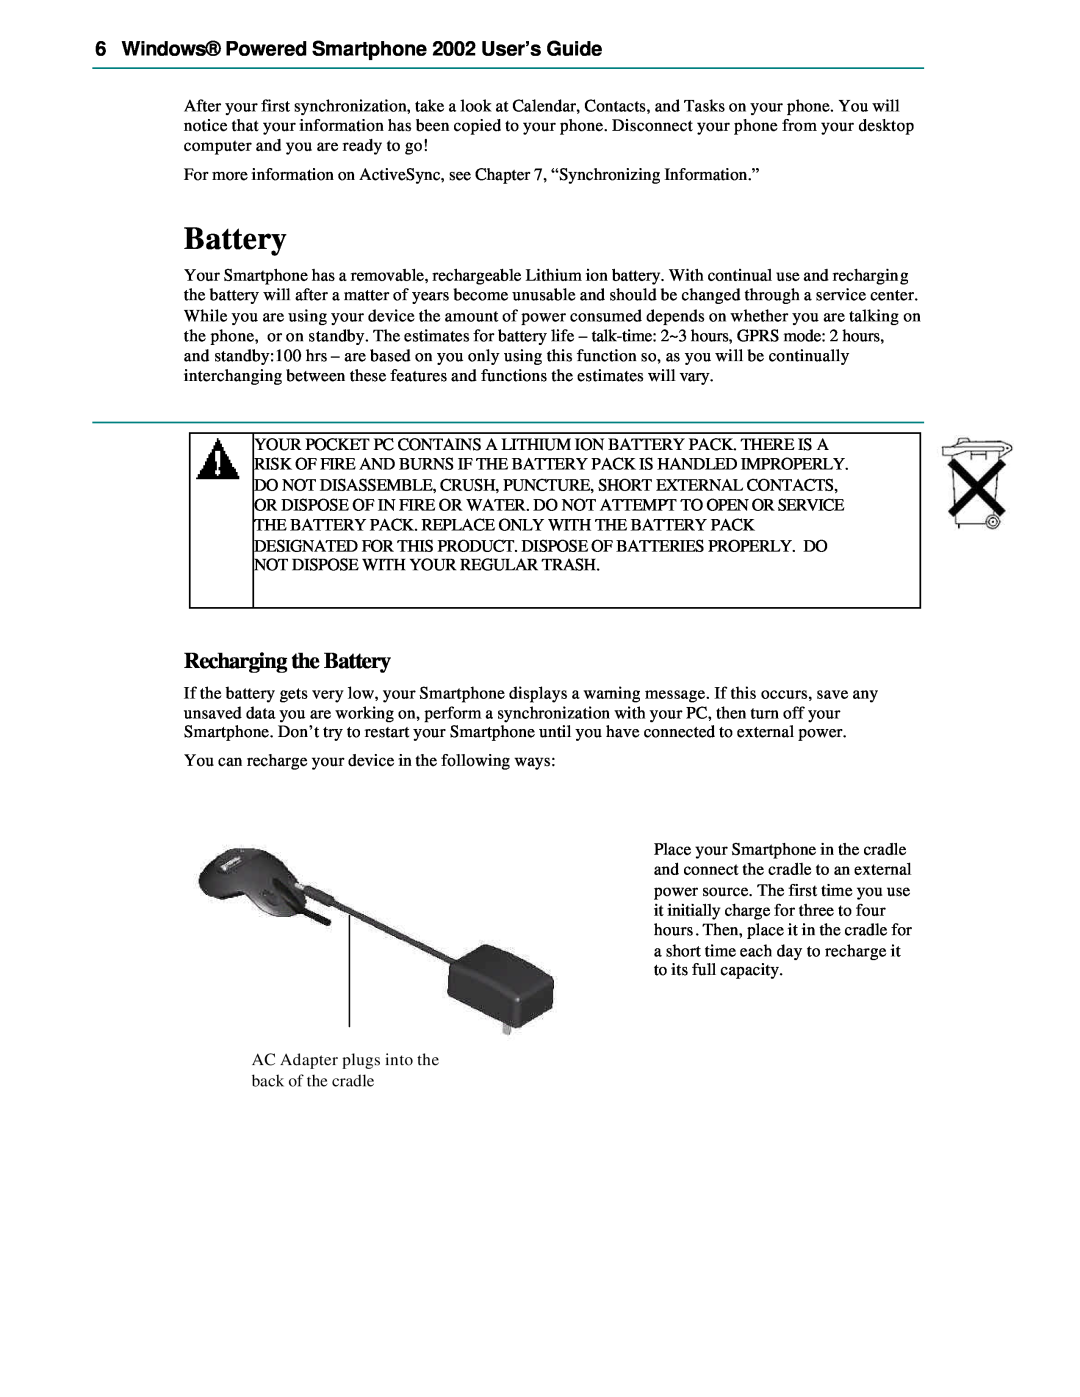 Microsoft manual Recharging the Battery, Windows Powered Smartphone 2002 User’s Guide 